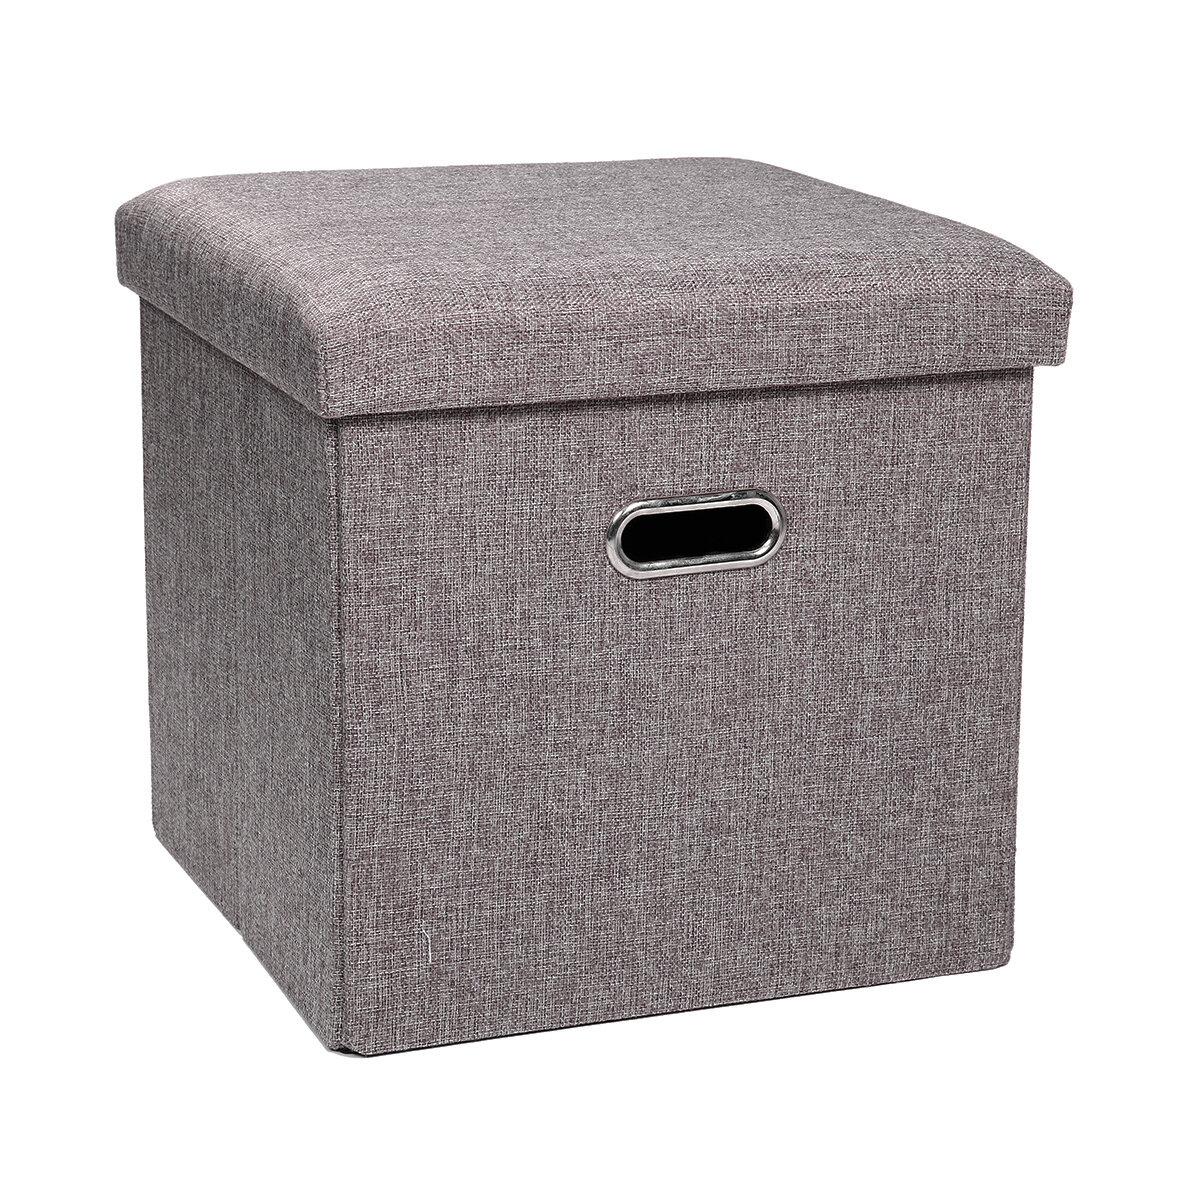 Folding Storage Box Stool Multifunctional Sofa Ottoman Footrest Footstool Square Chair for Home Office